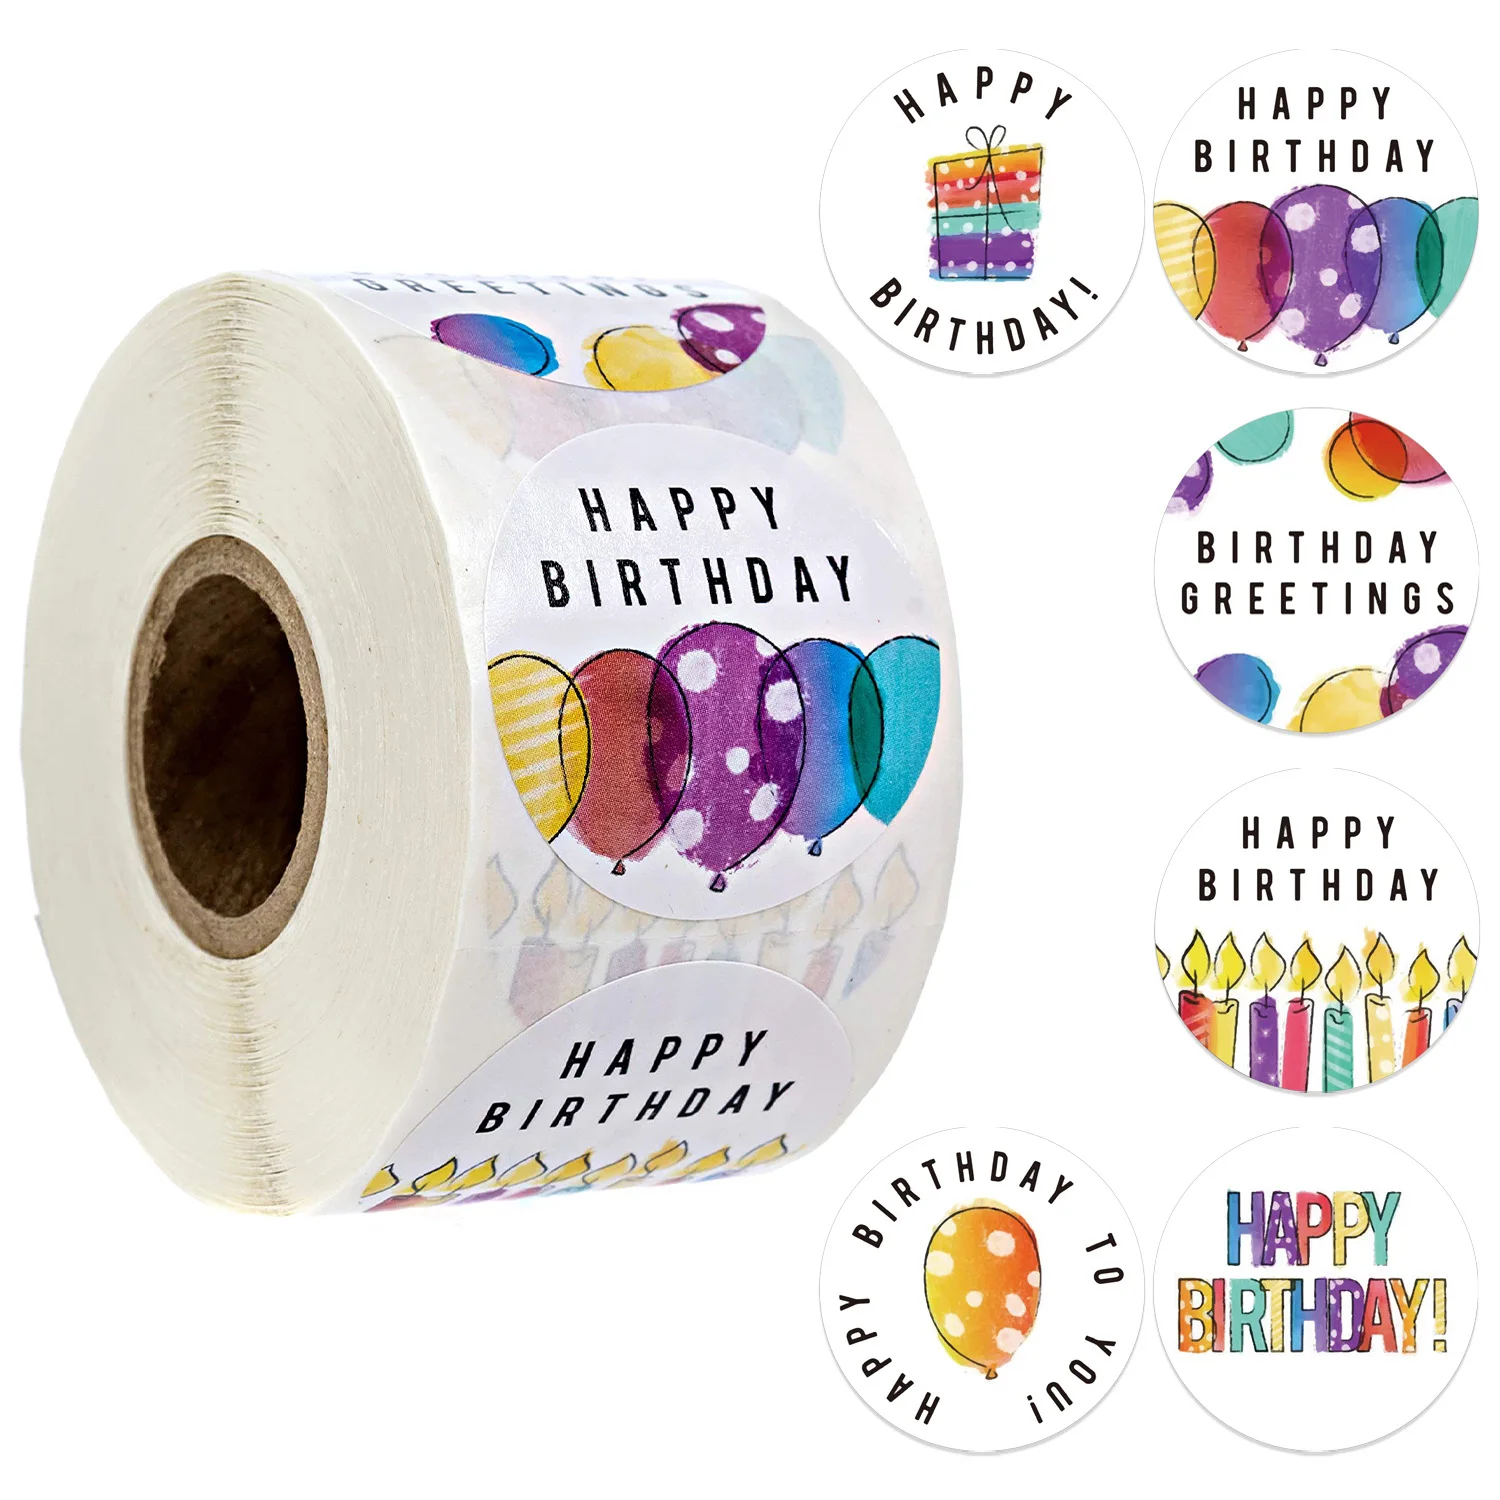 Фото - 500pcs Cute Happy Birthday Stickers 1.5'' Birthday Gift Decoration Tag Sealing Label Kids toys Gift Package Scrapbooking Sticker 500pcs roll 8 designs happy birthday stickers for party gift package sealing labels kids classic toys stationery scrapbook decor